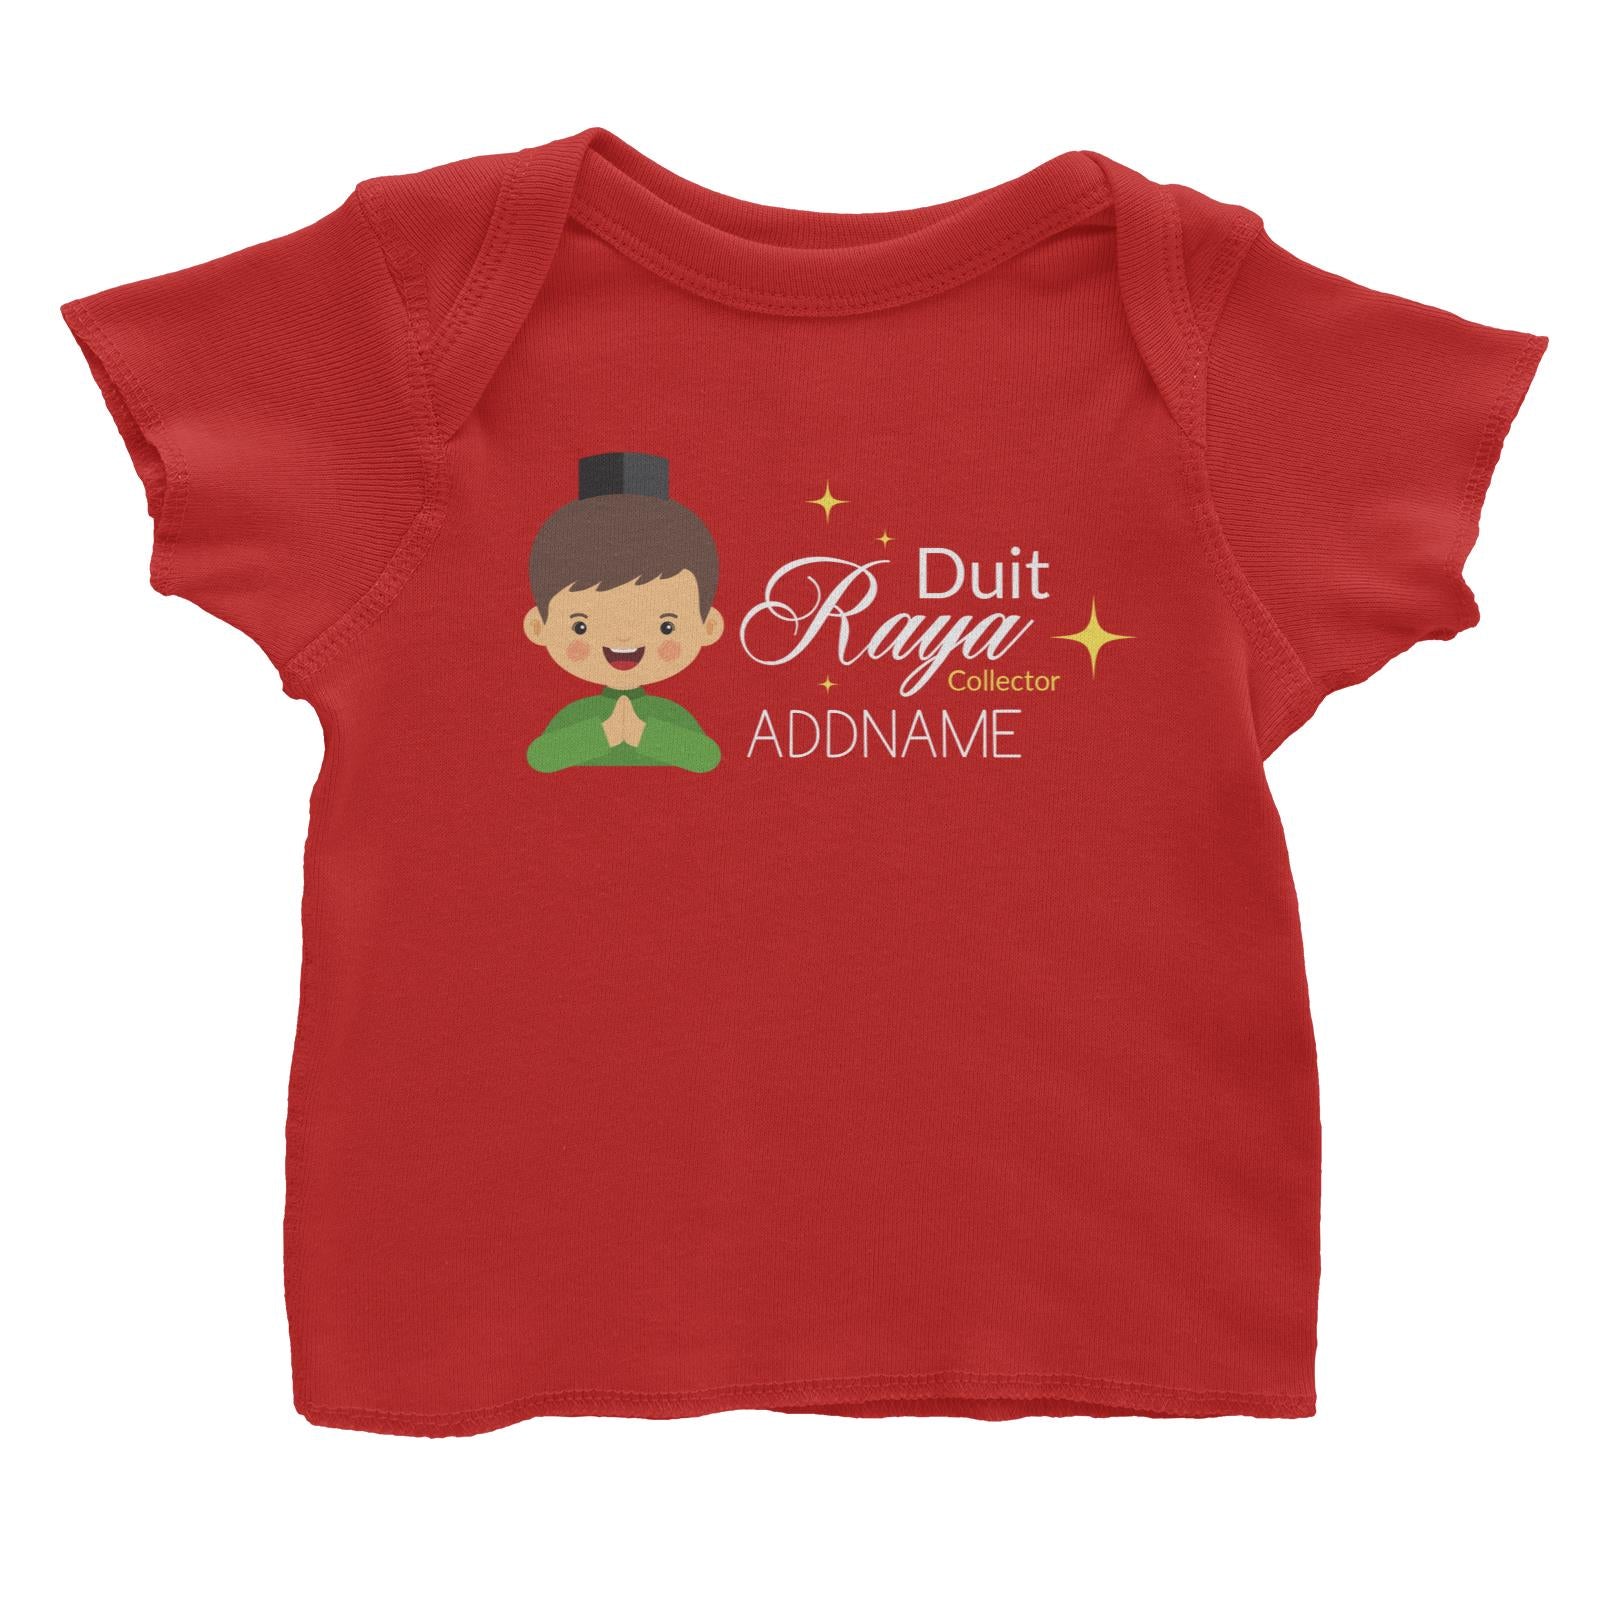 Duit Raya Collector Man Baby T-Shirt  Personalizable Designs Sweet Character